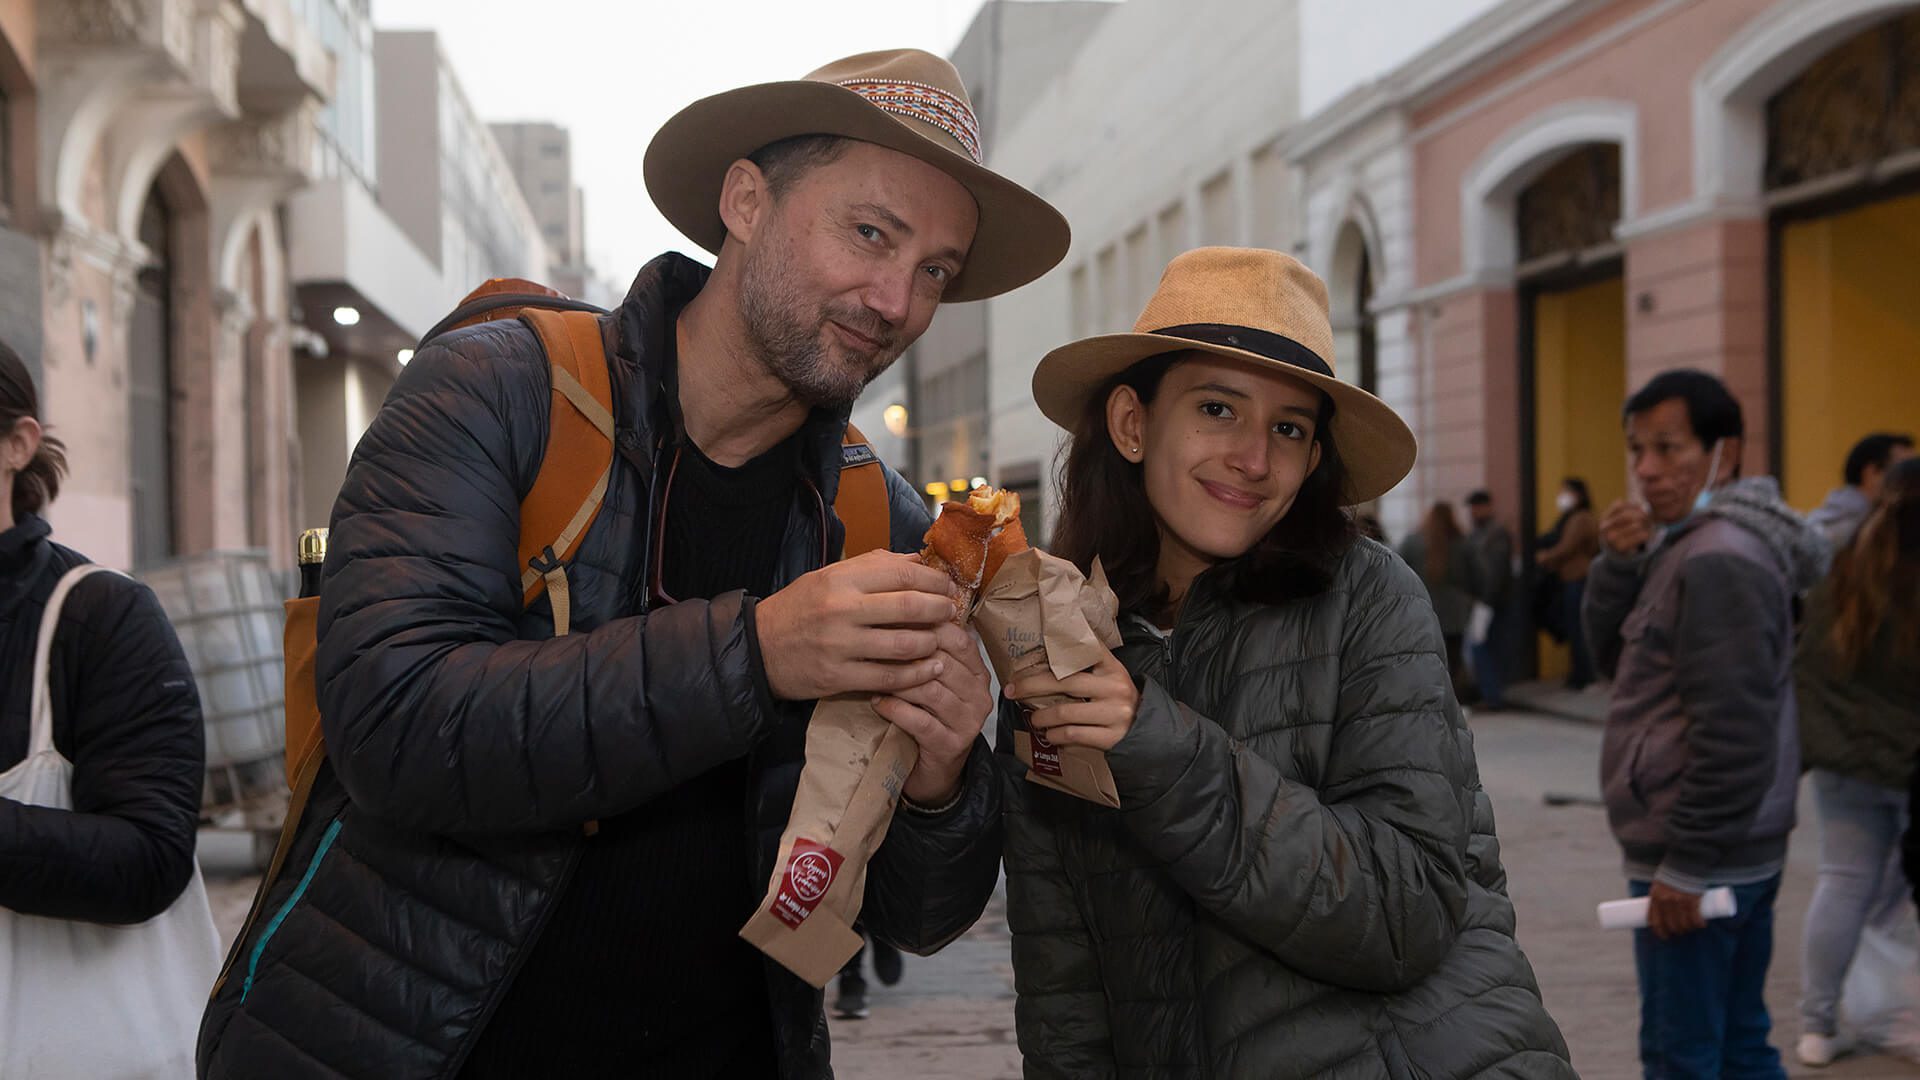 "Father and daughter enjoying a gastronomic experience in Lima | Impactful Travel"